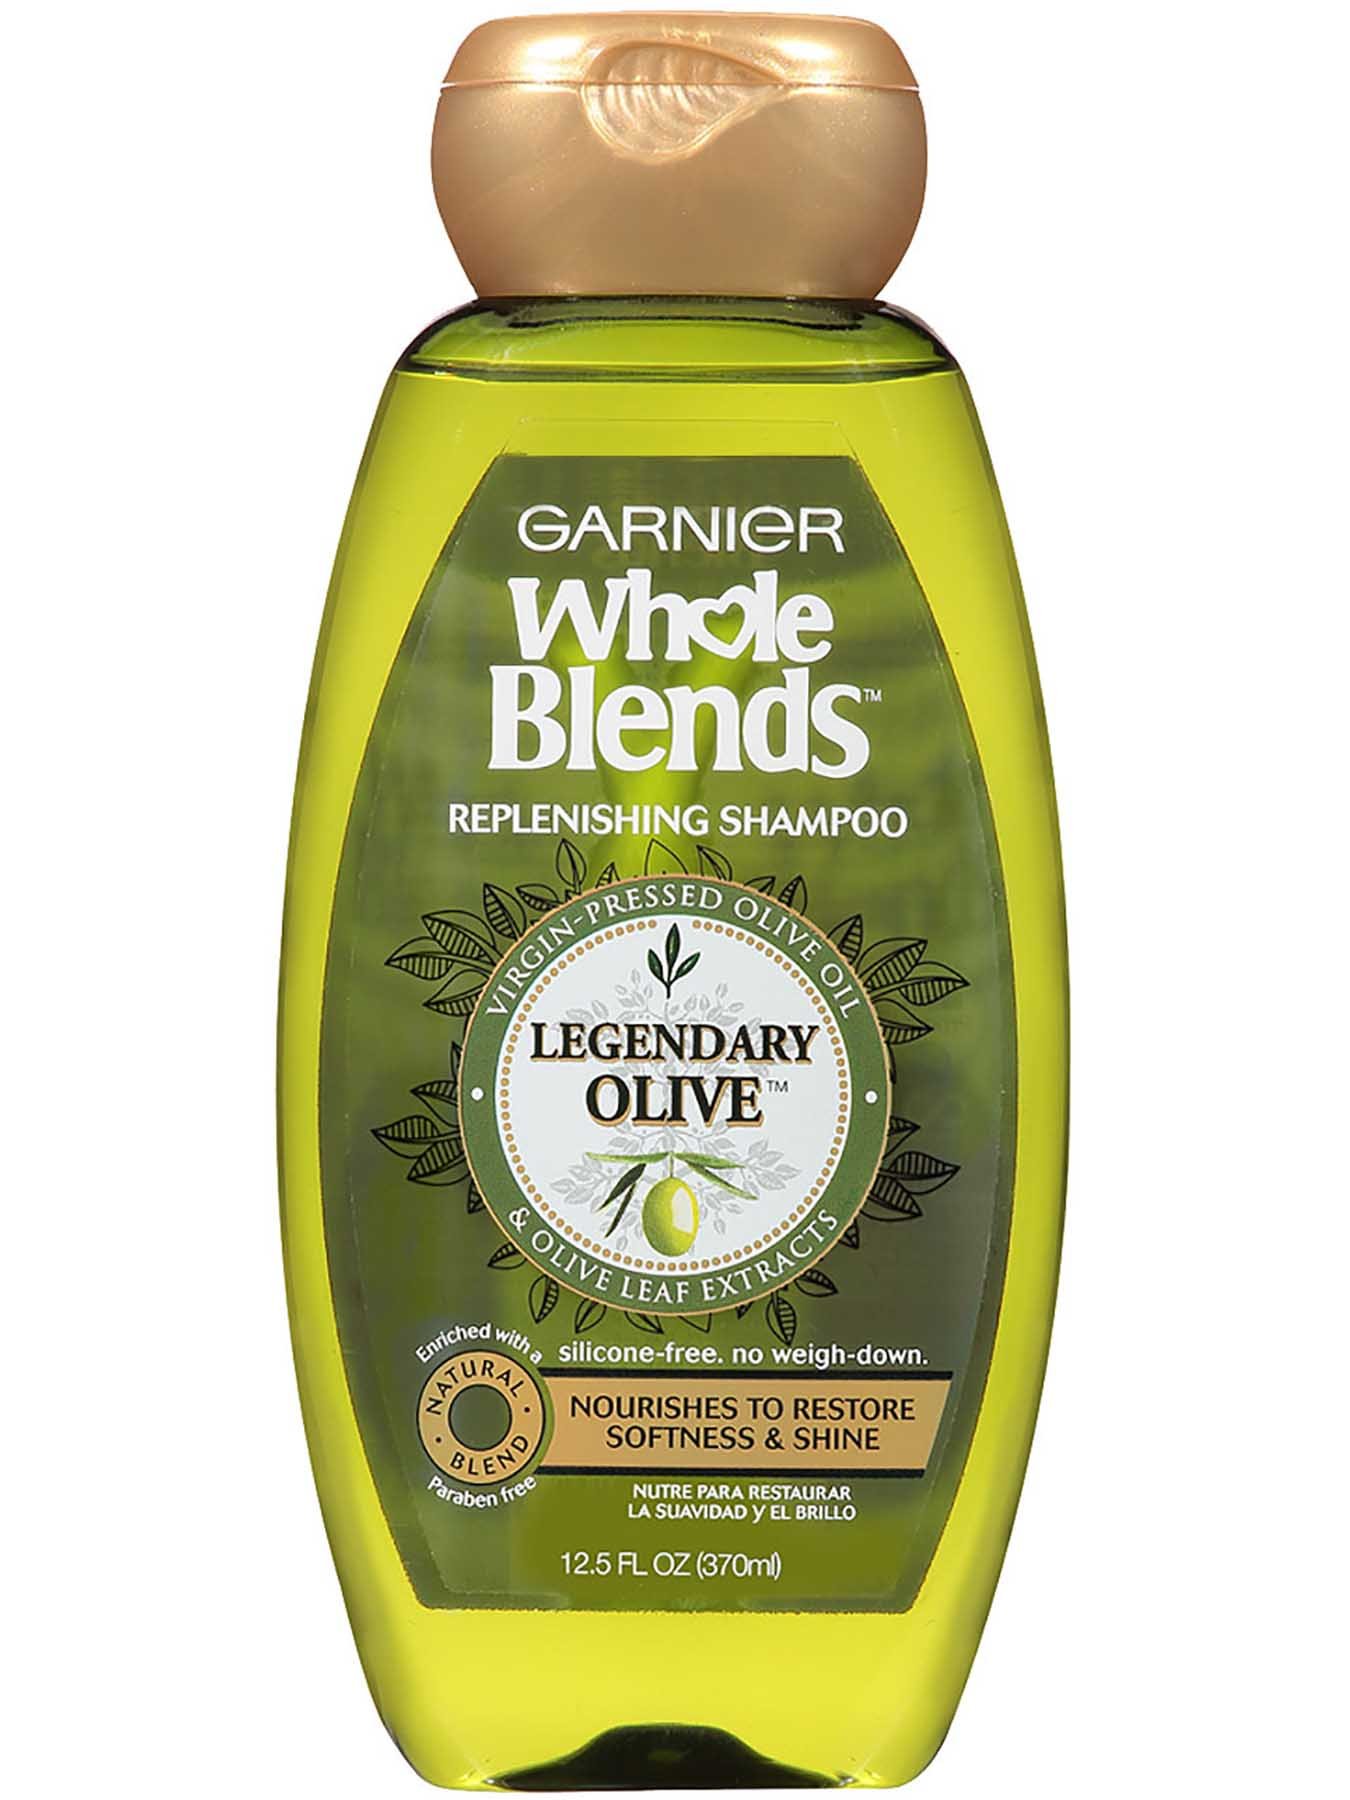 Front view of Replenishing Shampoo with Legendary Virgin-Pressed Olive Oil and Olive Leaf Extracts.